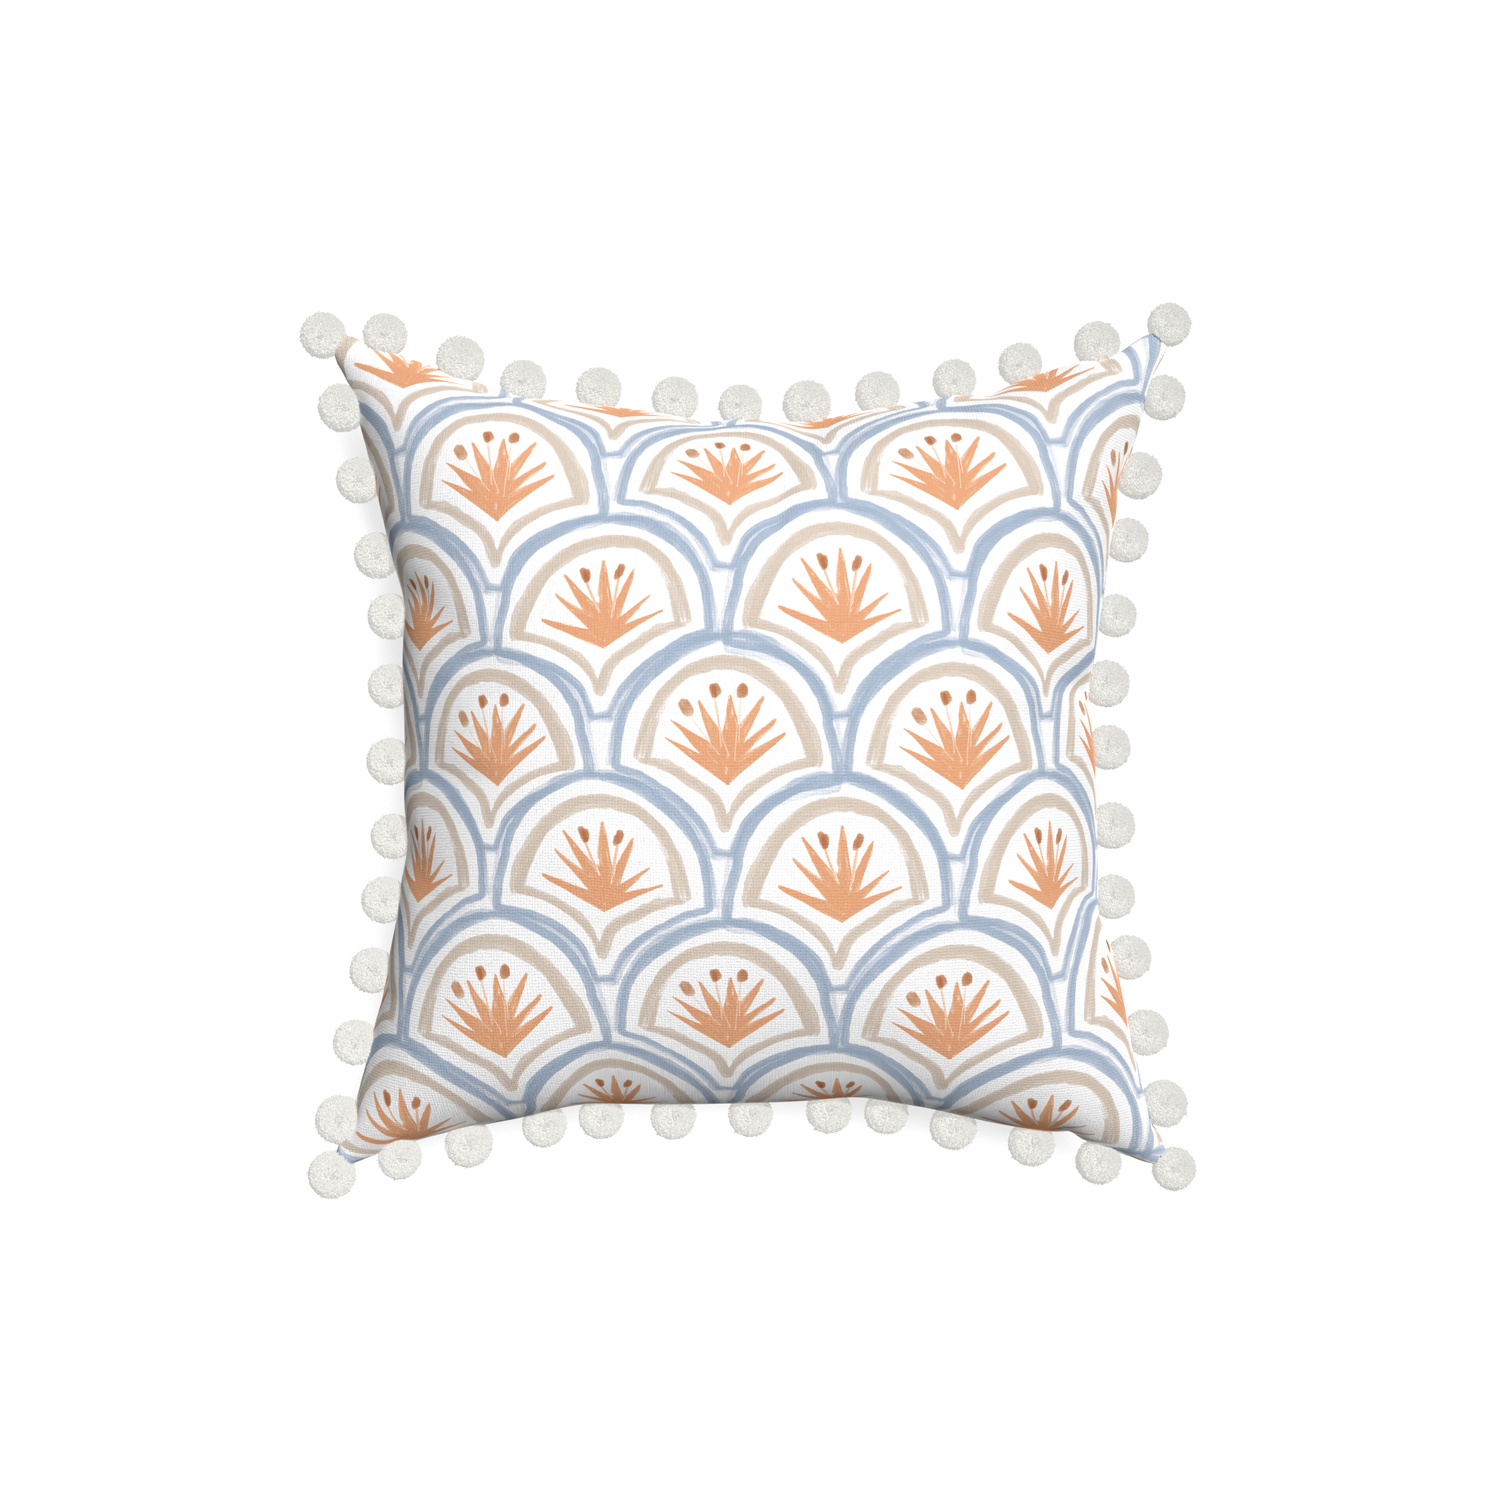 18-square thatcher apricot custom art deco palm patternpillow with snow pom pom on white background